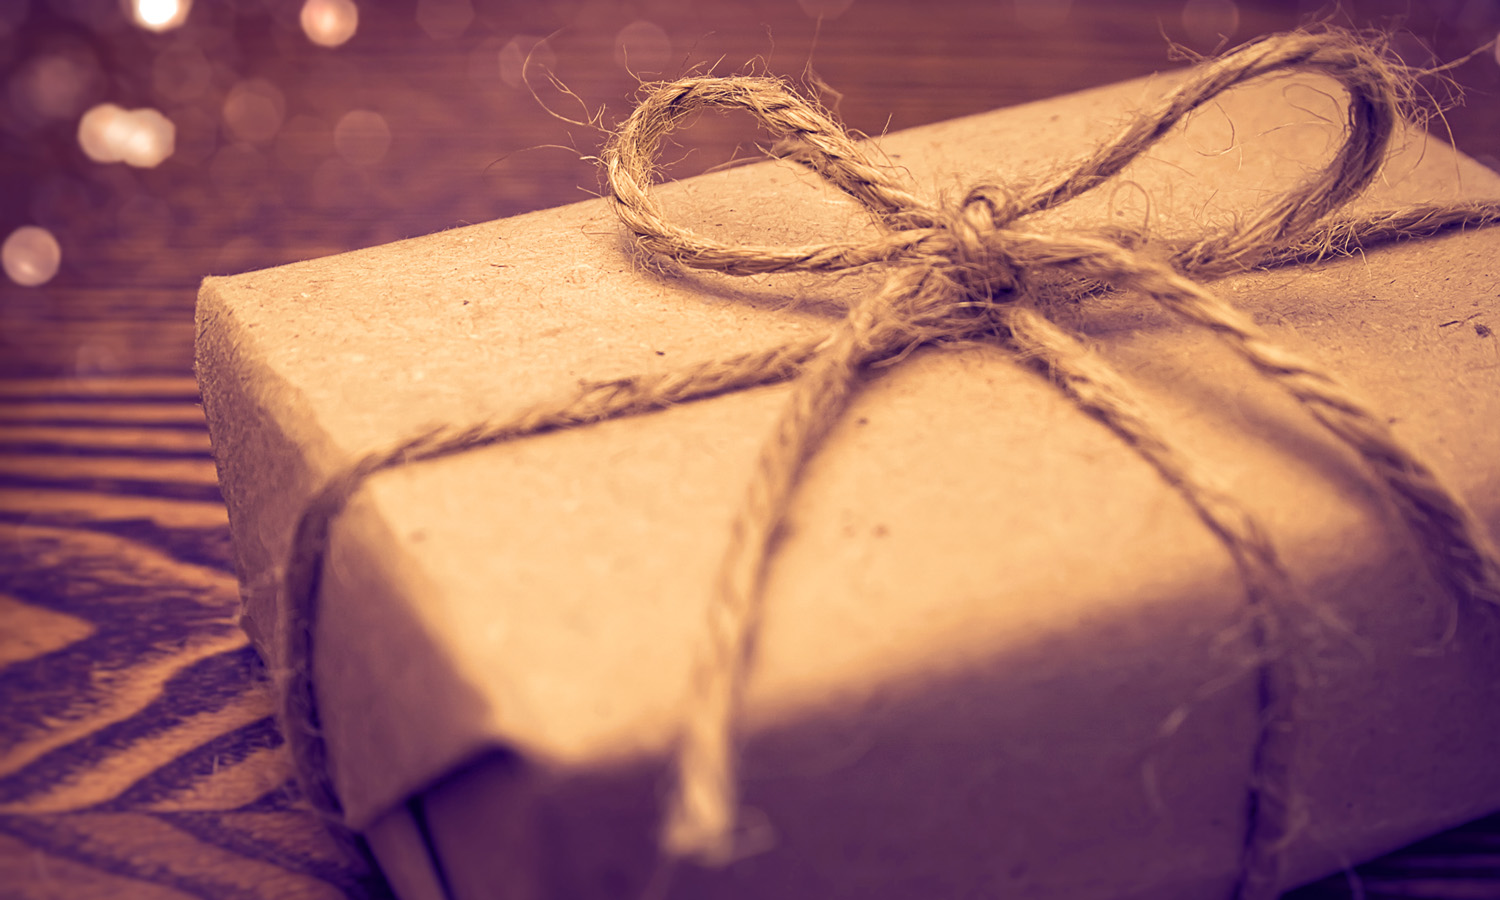 Gift wrapped in paper on the wooden background